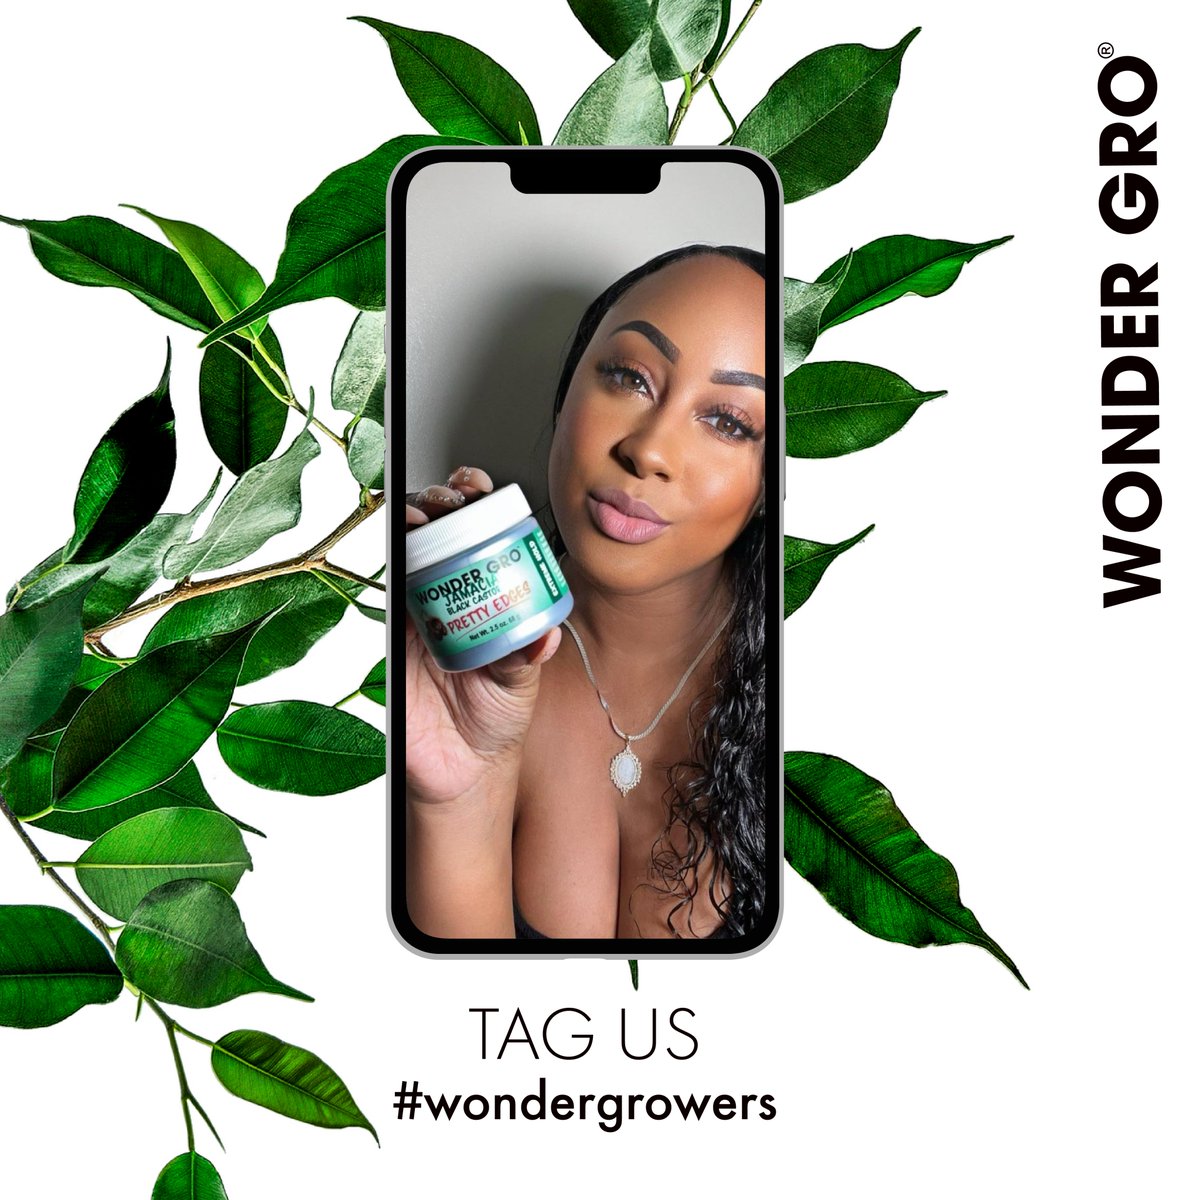 Don’t forget to Tag Us! #wondergrowers Show us how you use our products 🩵 
.
.
#WonderGro #naturalhairjourney #naturalhairlife #healthyhair #hairgoals #curlyhair #naturalhairgoals #transitioninghair